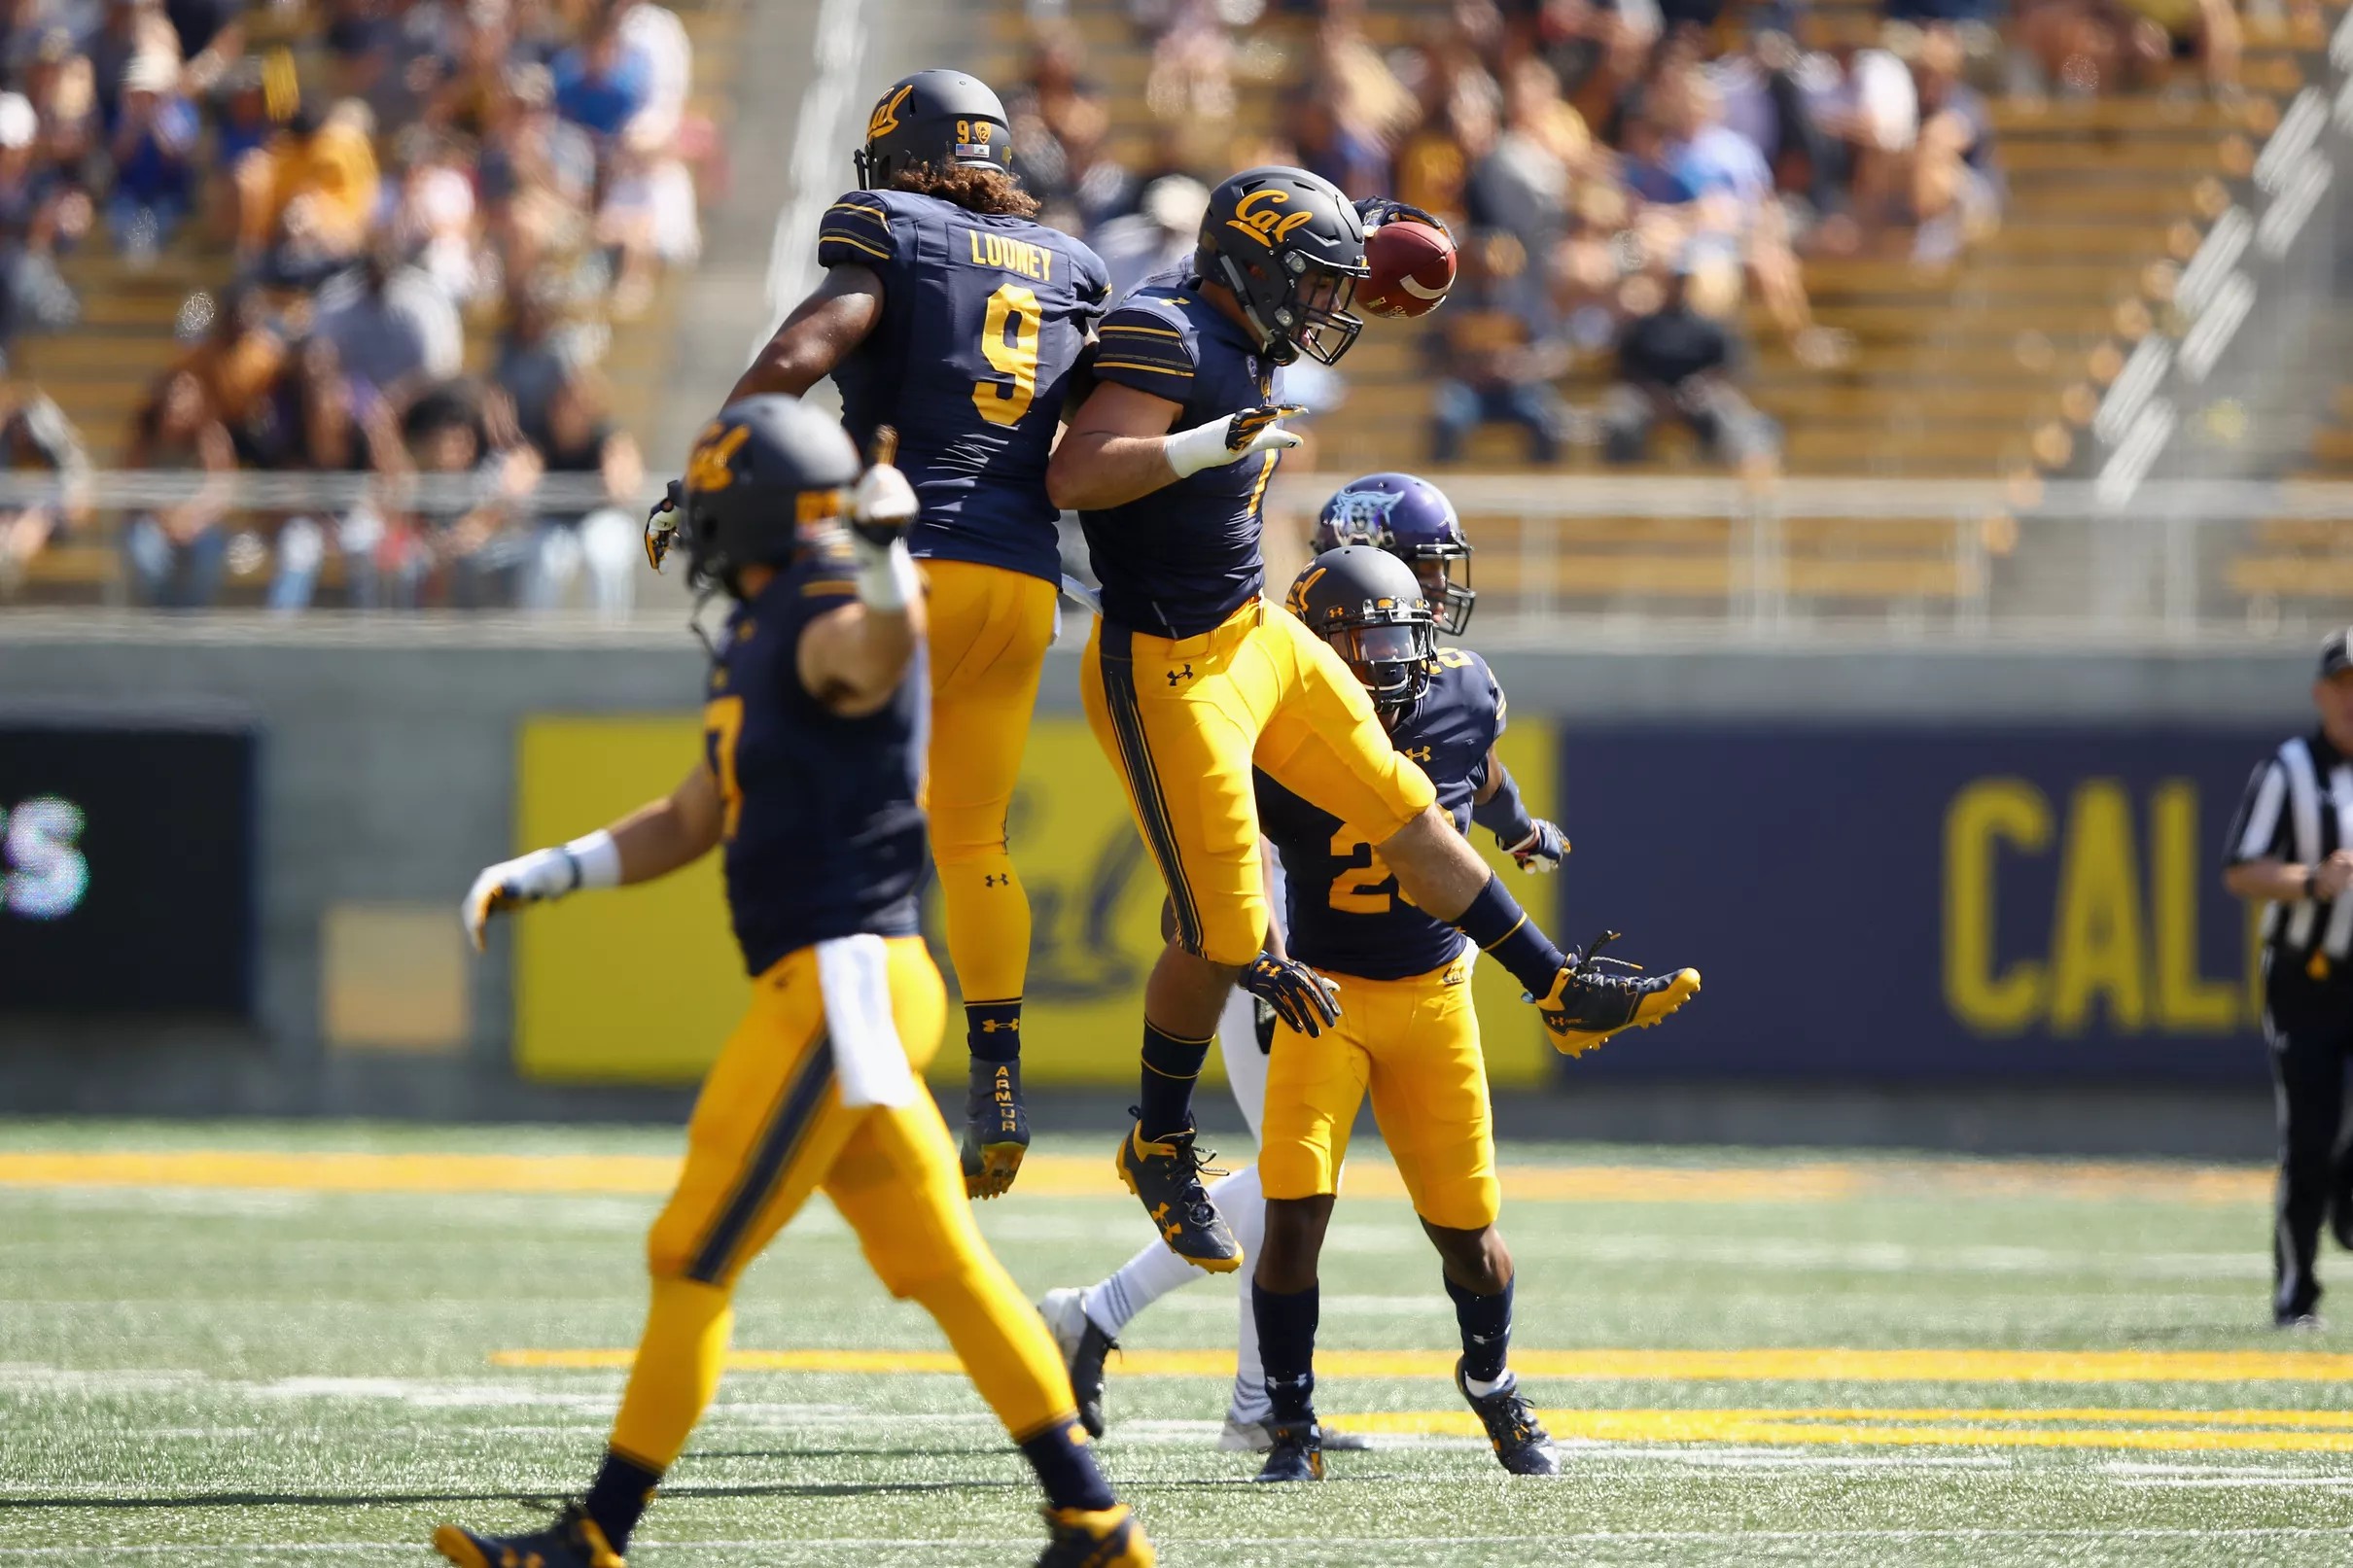 Four Cal Football players get Honorable Mention!